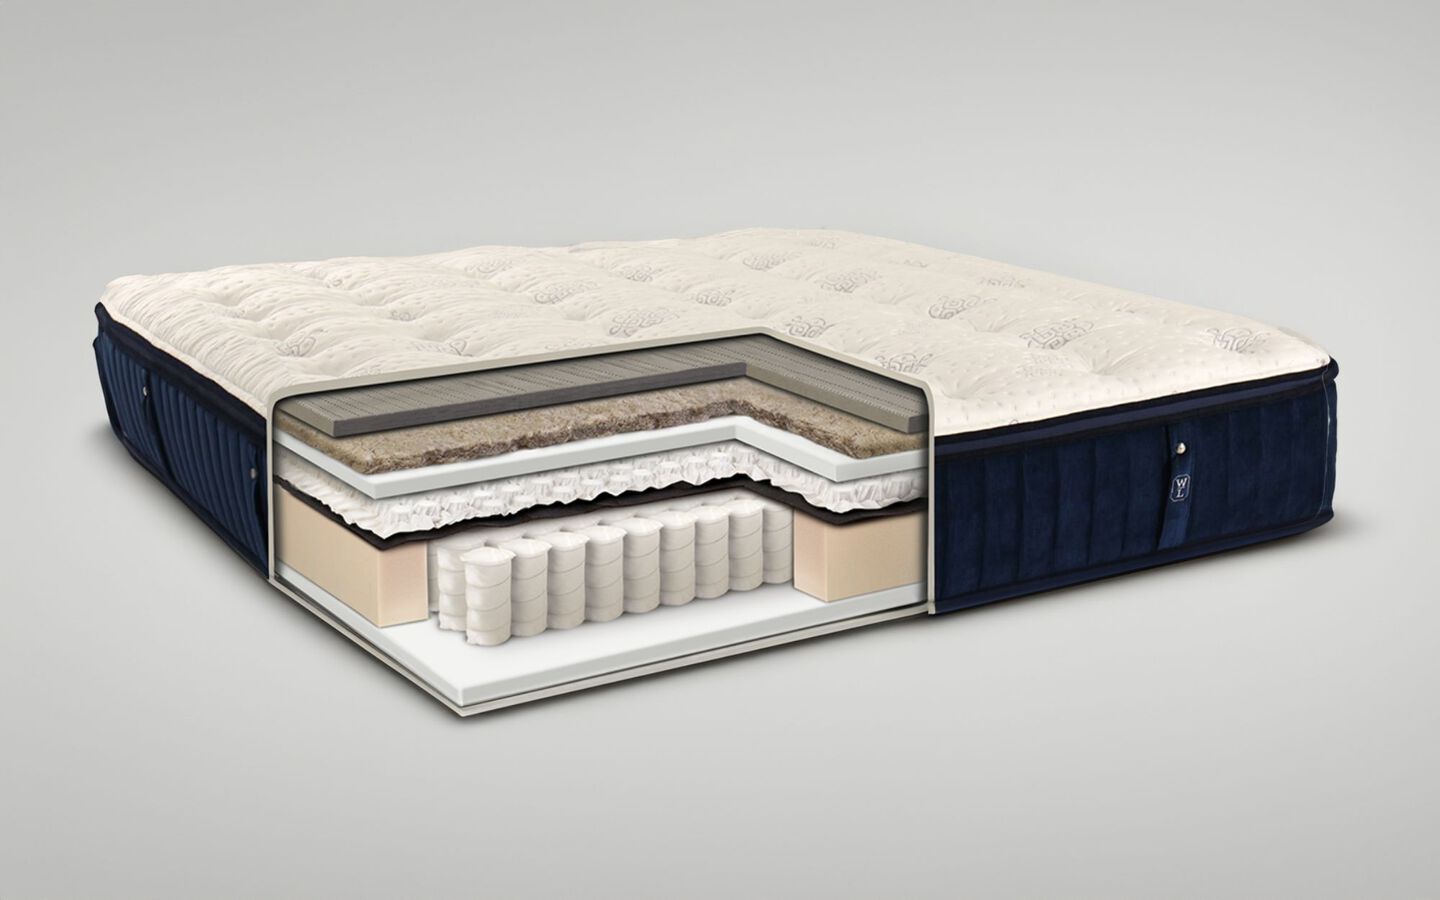 image of the inner layers of an innerspring mattress